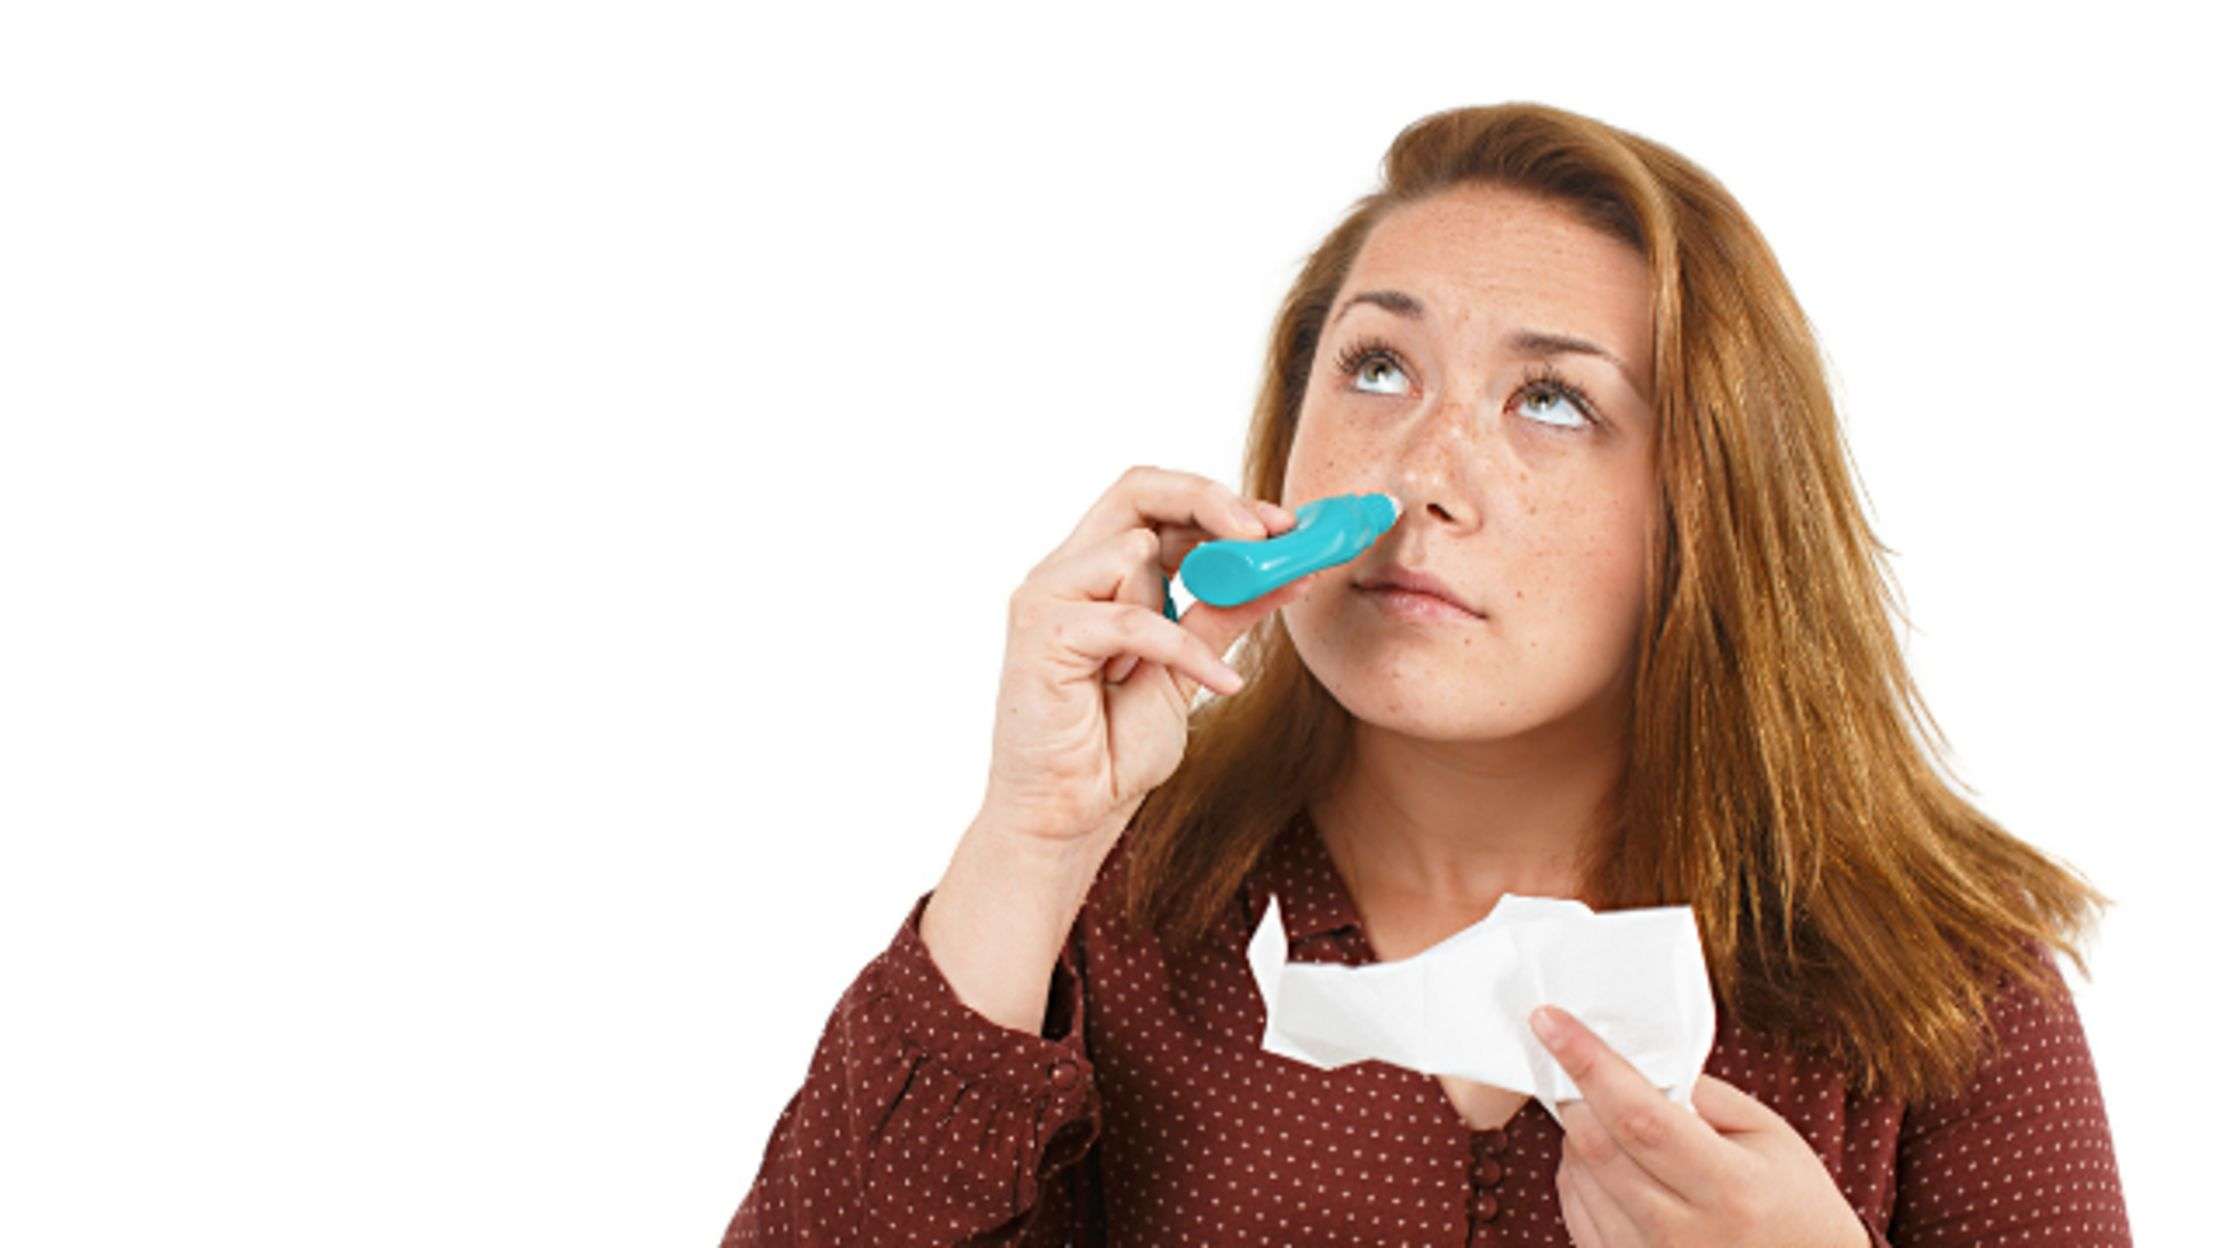 Constantly Congested? Ease Up on the Nasal Spray